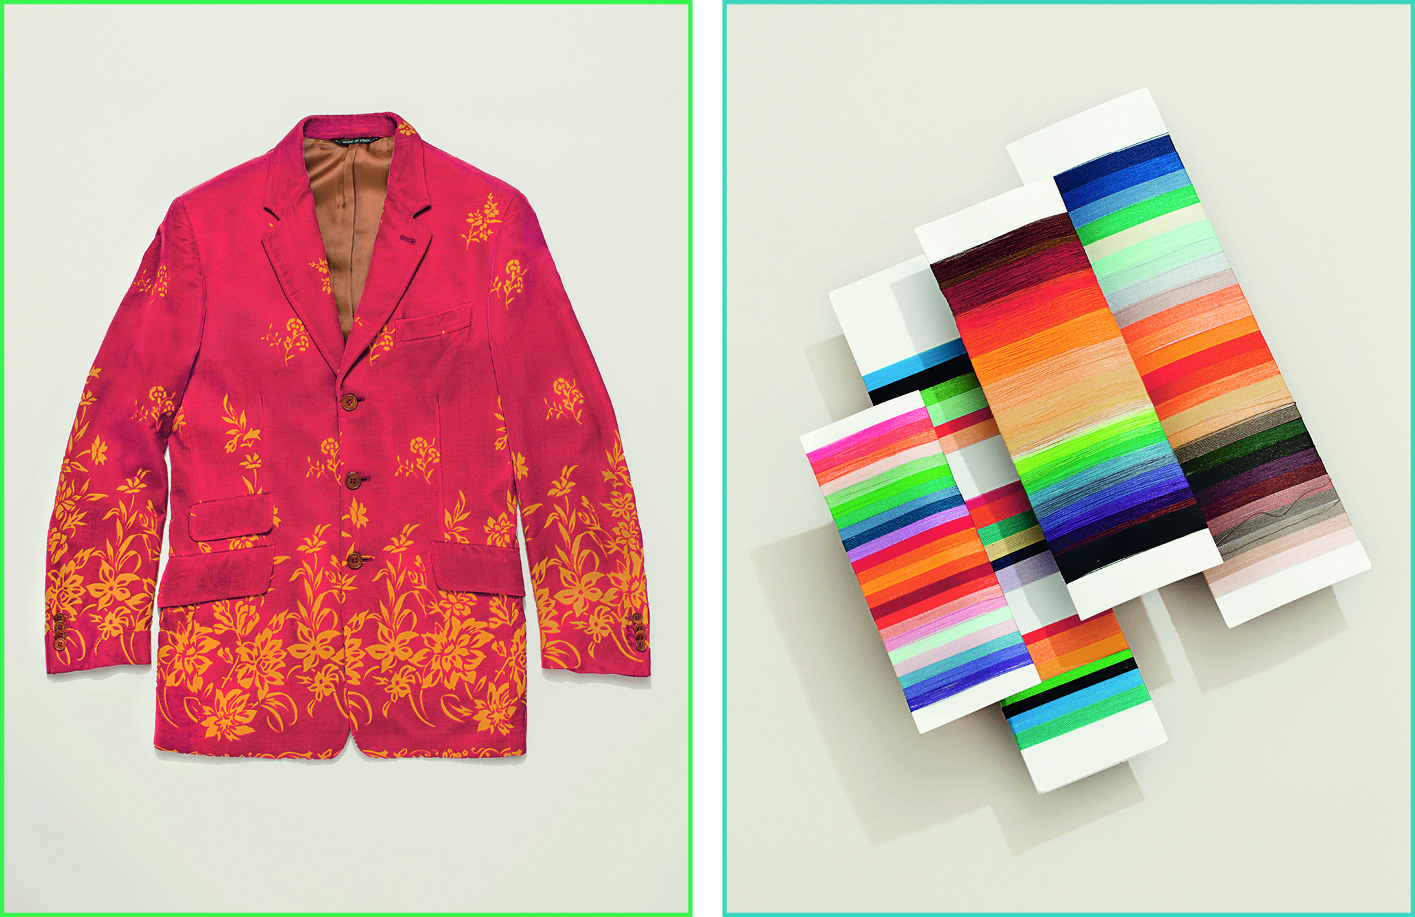 Paul Smith's playful design style can be seen in this Velvet blazer and the colourful stripes he's known for